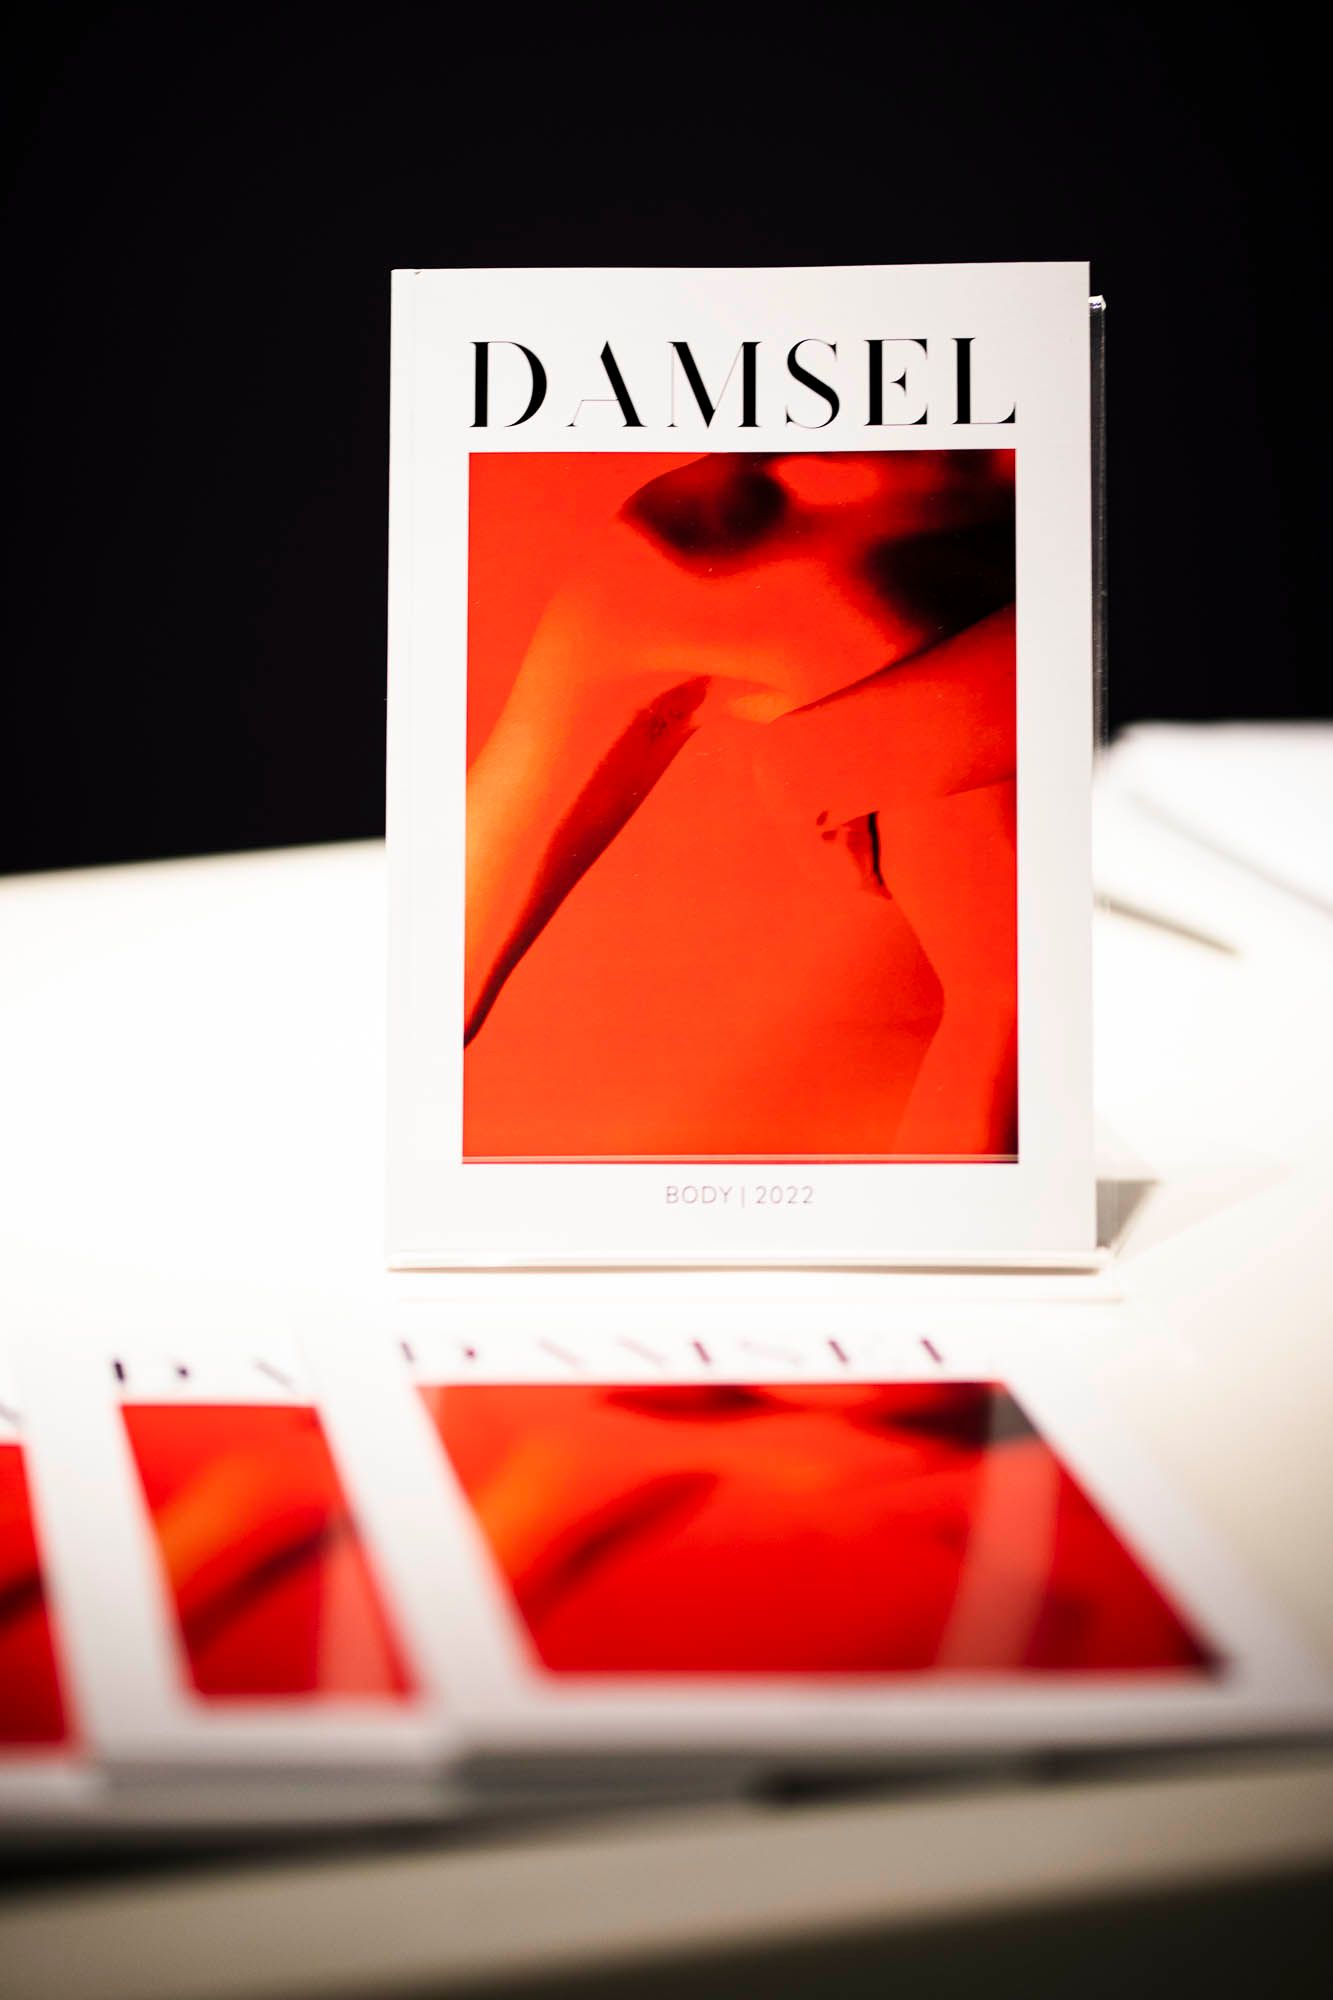 Copies of Damsel Magazine are displayed on a stark white tablecloth. The magazine is glossy, with a dramatic contrast between the abstract red photograph of a person's torso and the crisp black-and-white title. Photograph by Charlie Beveridge, courtesy of the UWA Student Guild Women's Department.